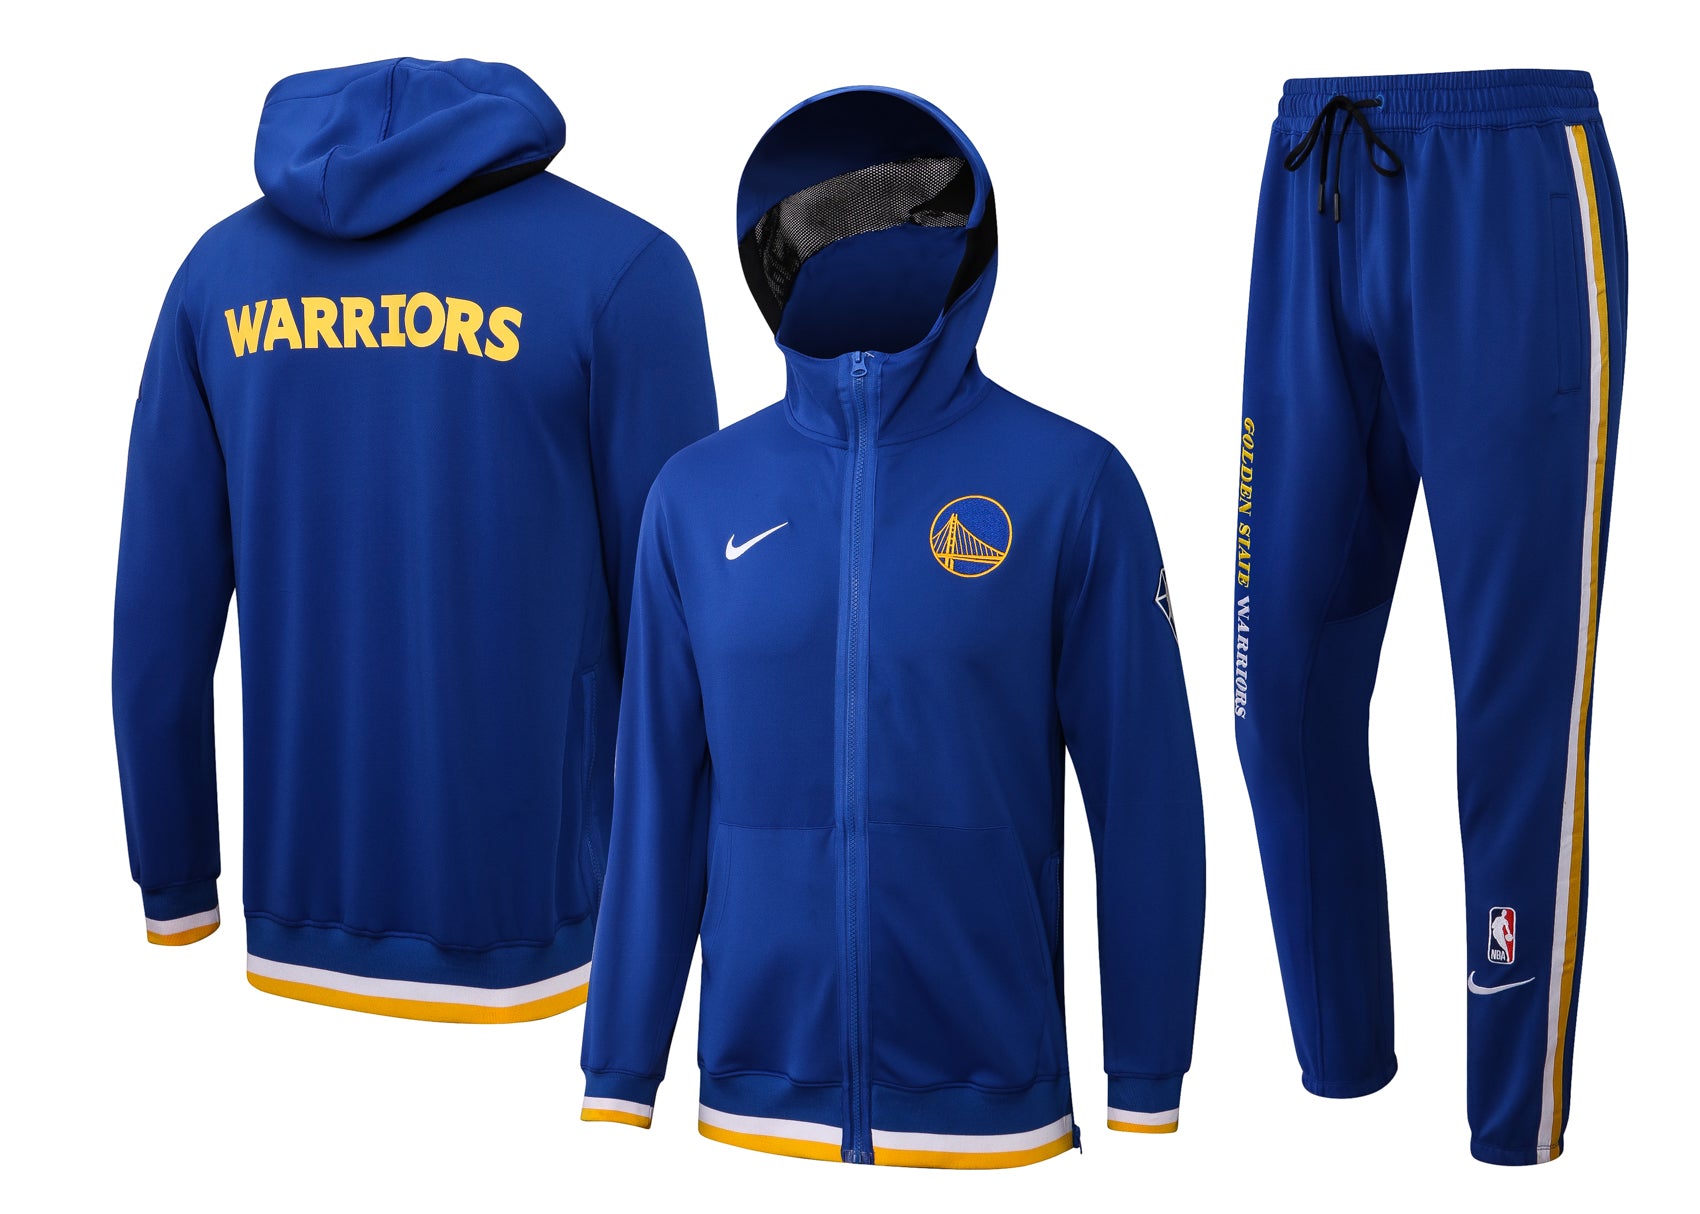 State warriors blue suit